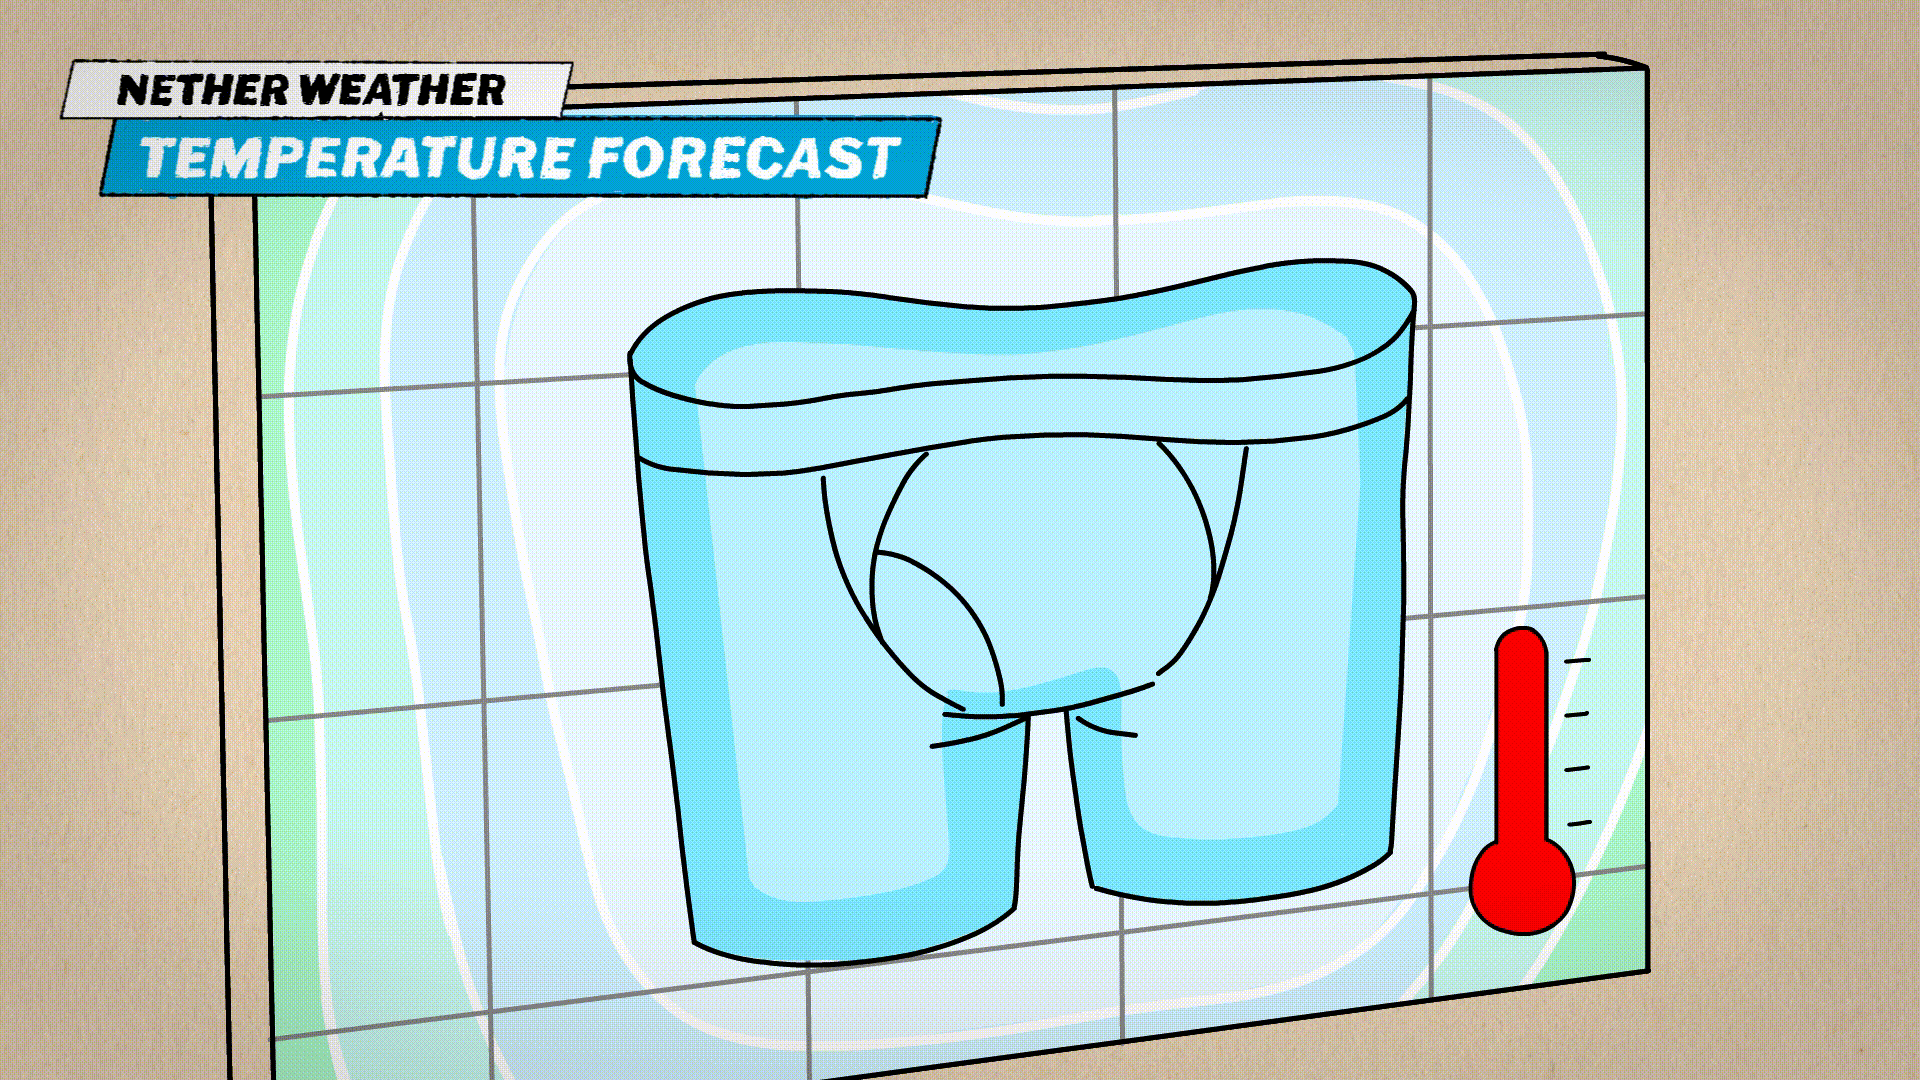 humorous animation showing underwear on a weather map